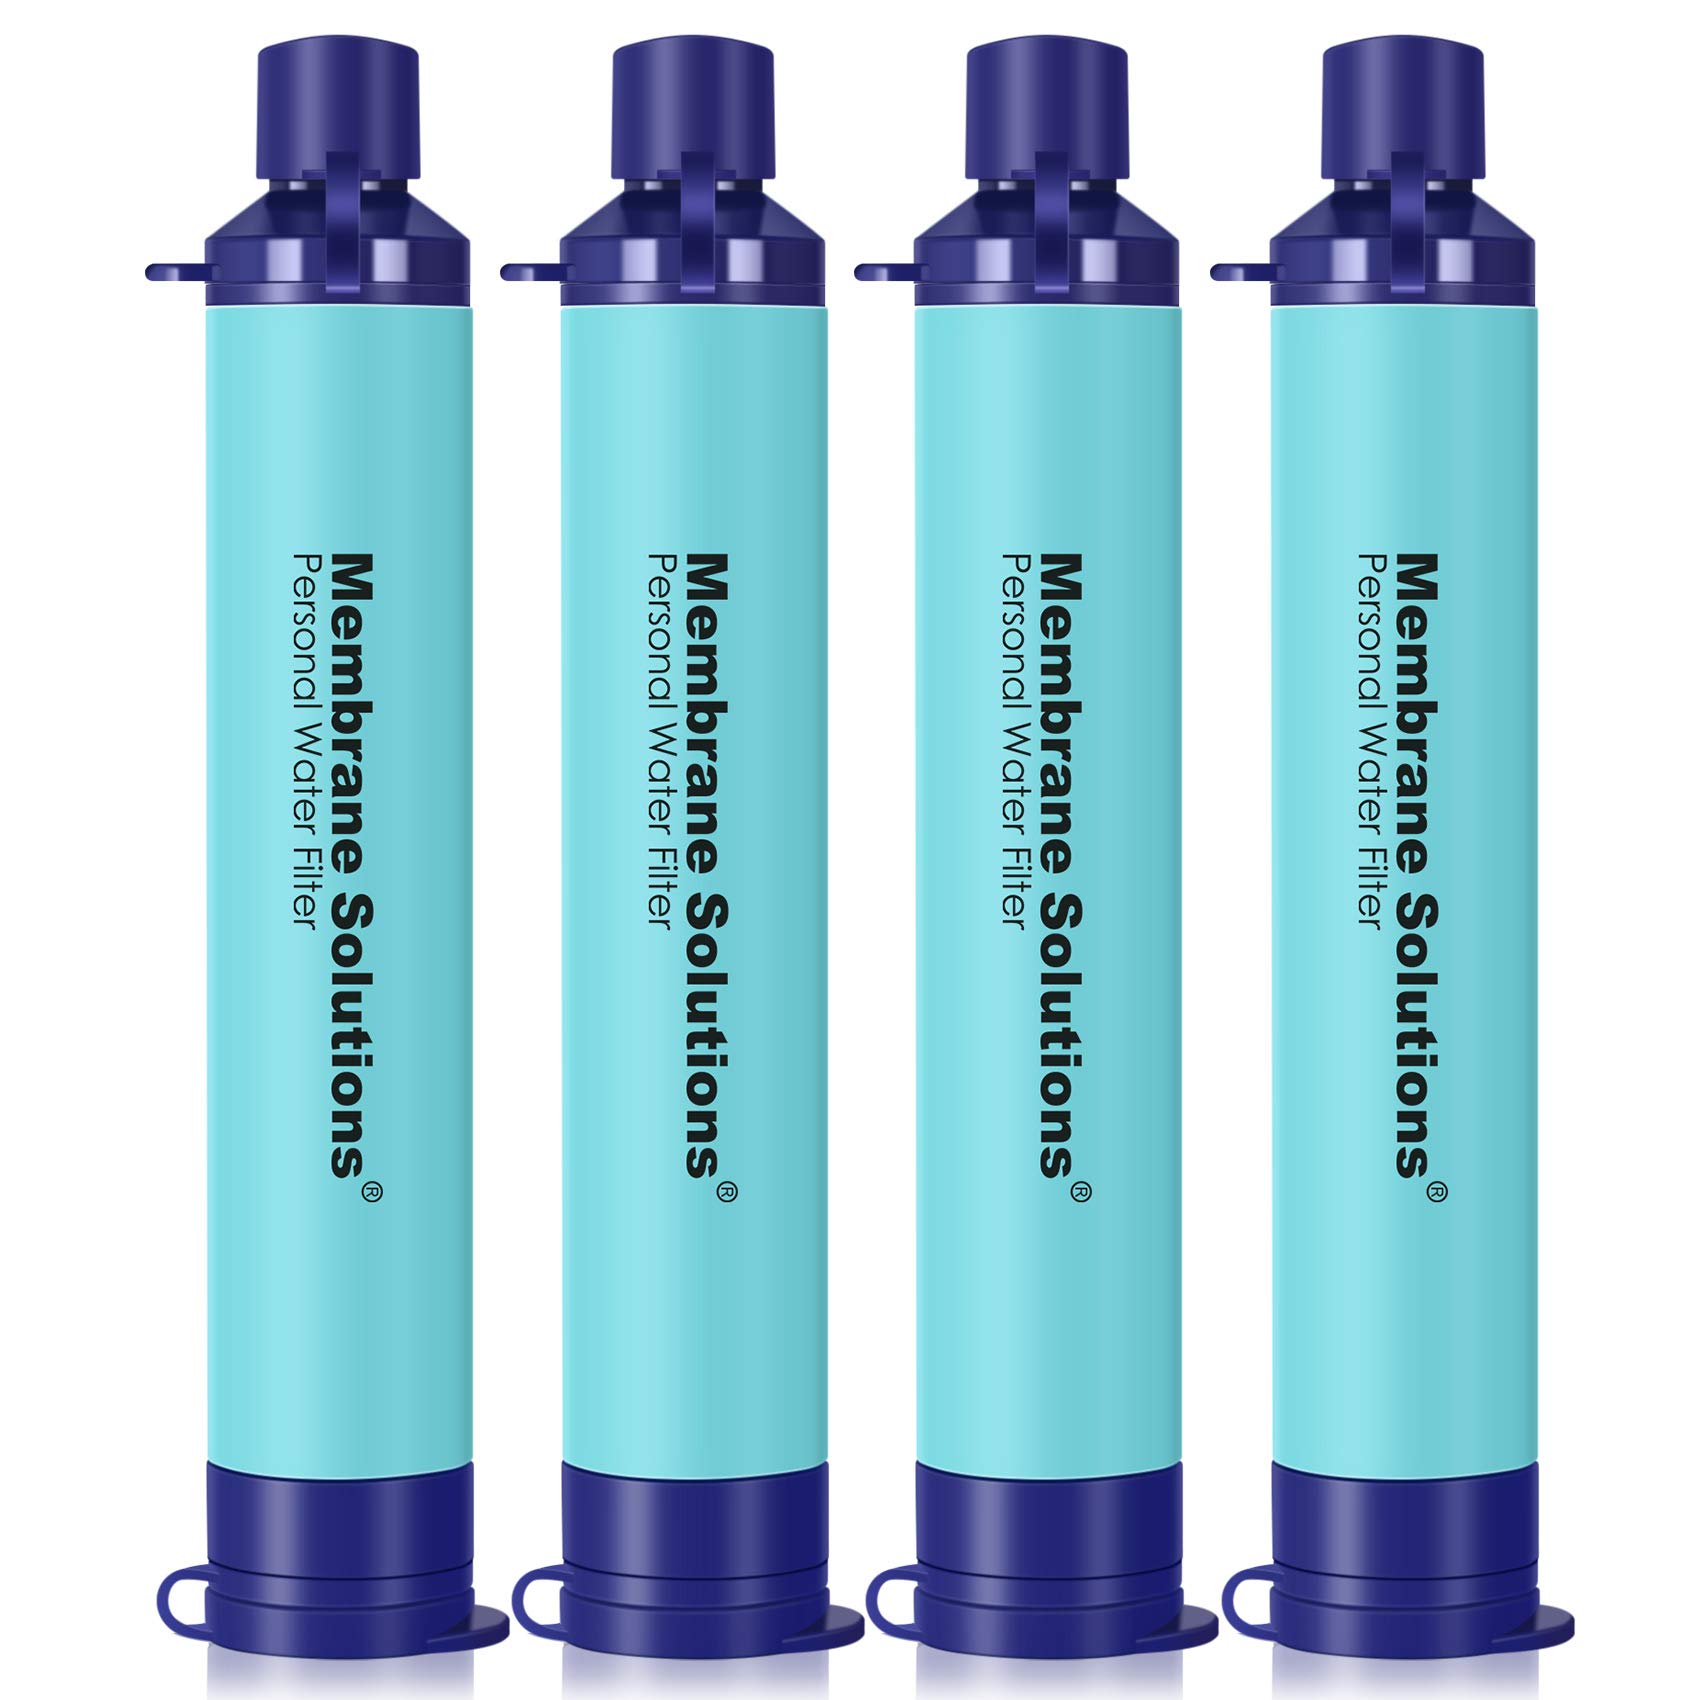 4-Pack Membrane Solutions Portable Water Filter Straw Filtration (Blue) $15.59 + Free Shipping w/ Prime or on $35+